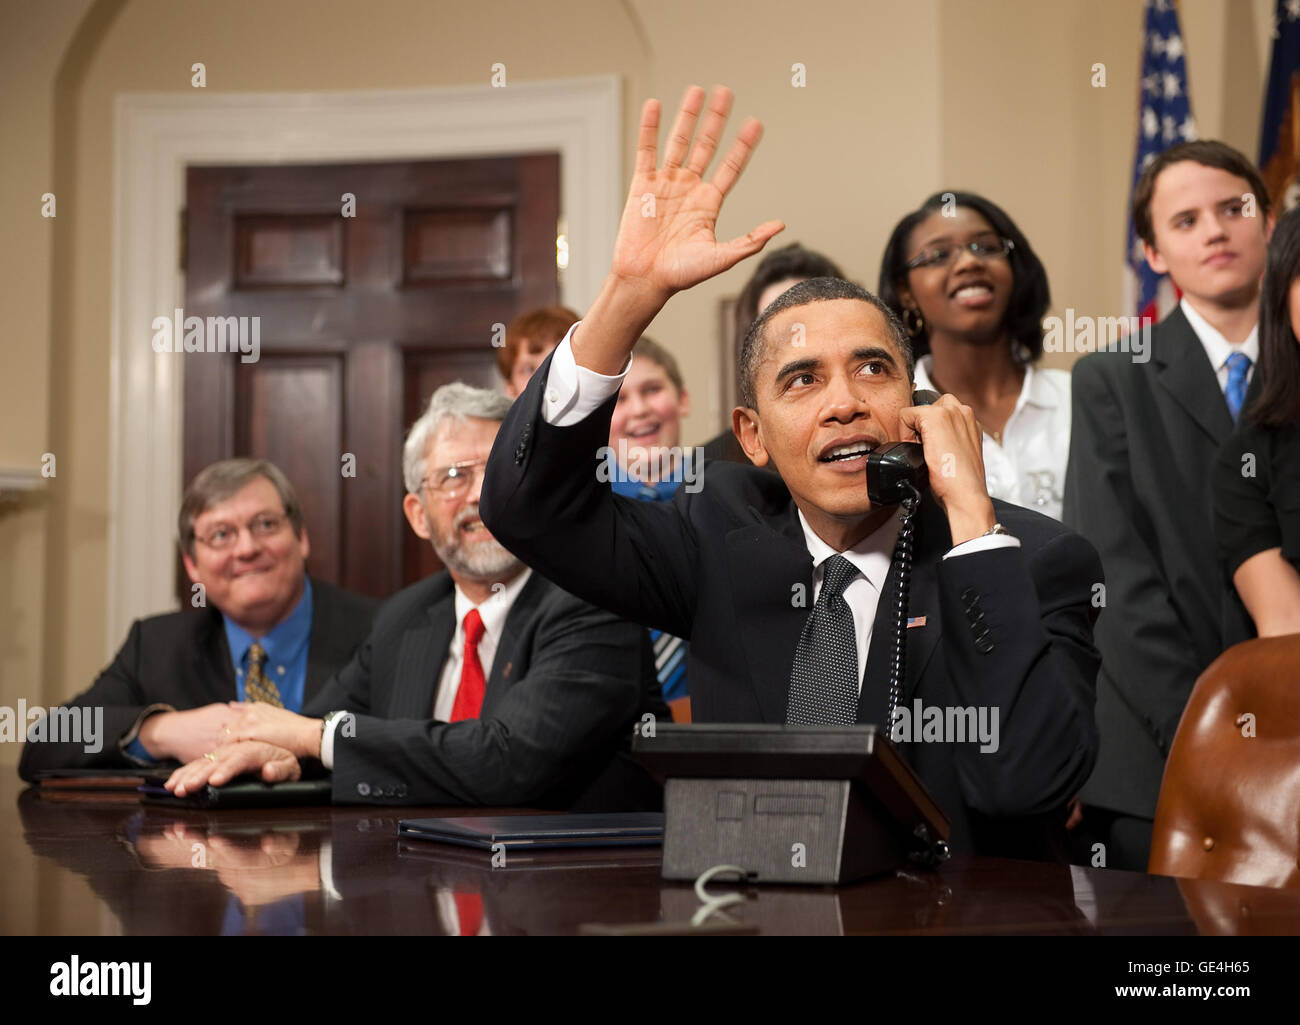 U.S. President Barack Obama, accompanied by members of Congress and middle school children,  waves as he talks on the phone from the Roosevelt Room of the White House to astronauts on the International Space Station, Wednesday, Feb. 17, 2010 in Washington.   Image #: 2010-02-17-0001Hq  Date: February 17, 2010 Photo Credit: (NASA/Bill Ingalls) Stock Photo